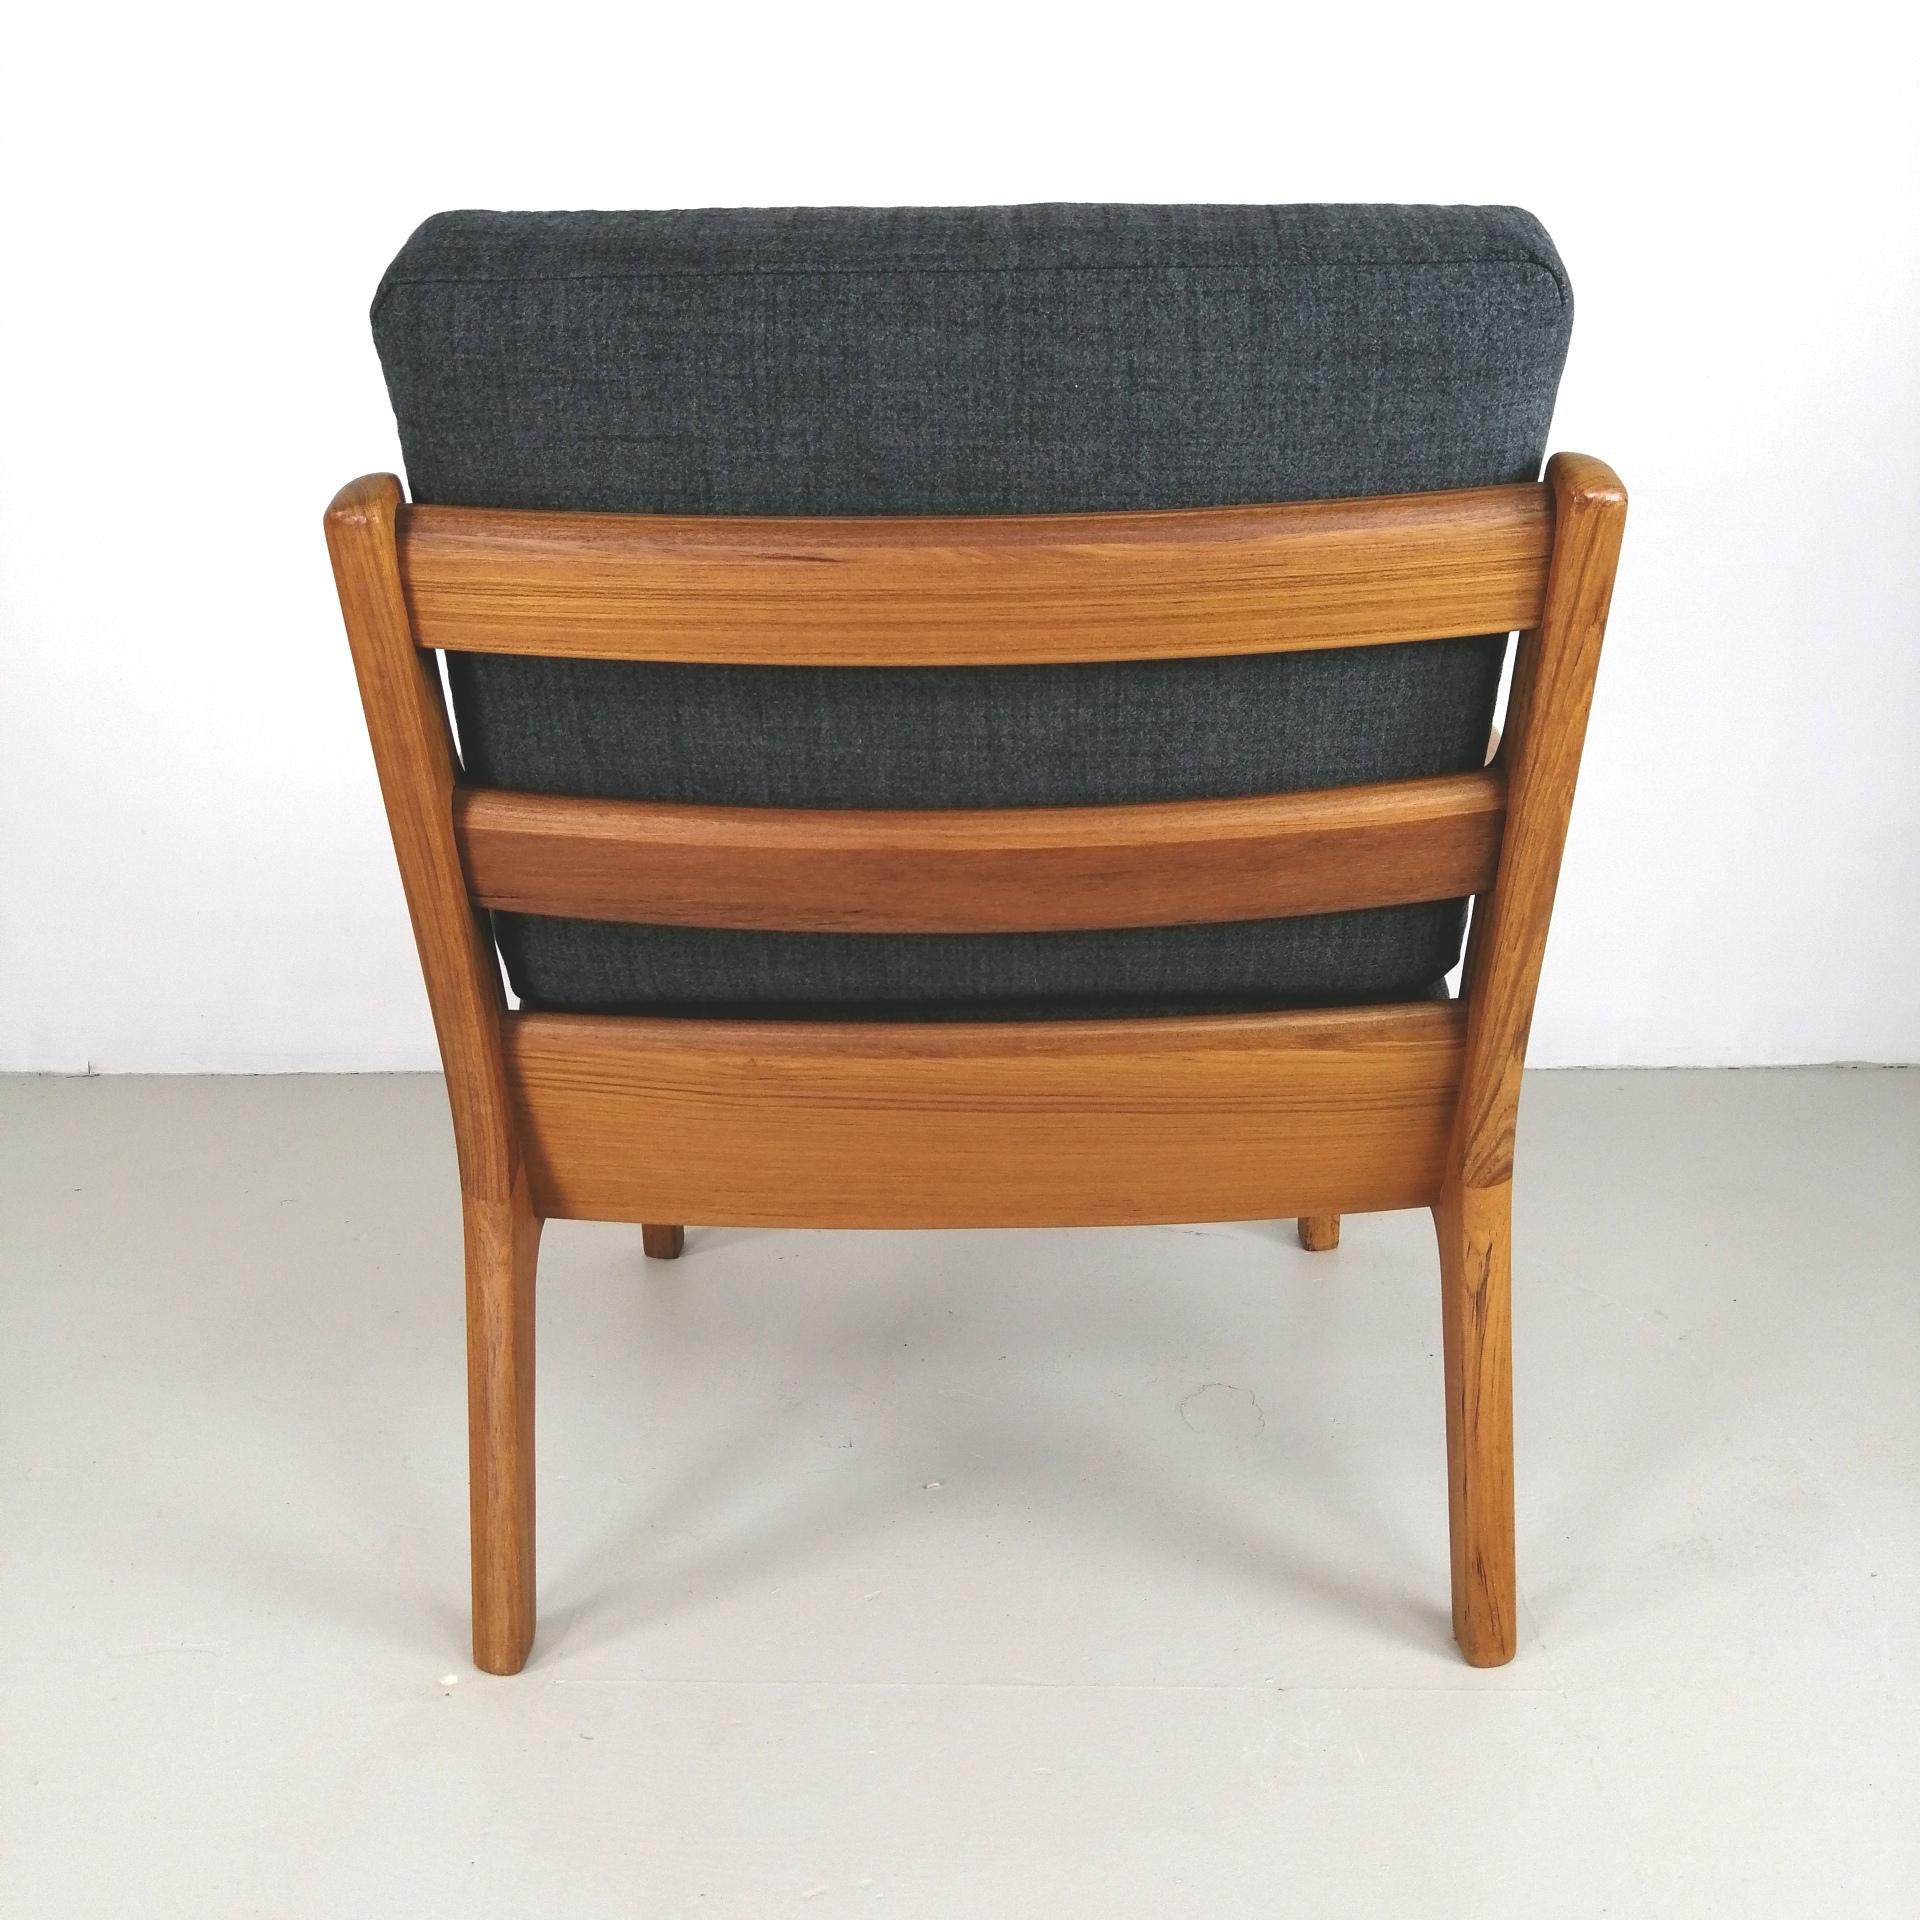 Ole Wanscher 1960s Teak Lounge Chair with Matching Ottoman, Grey Upholstery In Good Condition In Lewes, East Sussex